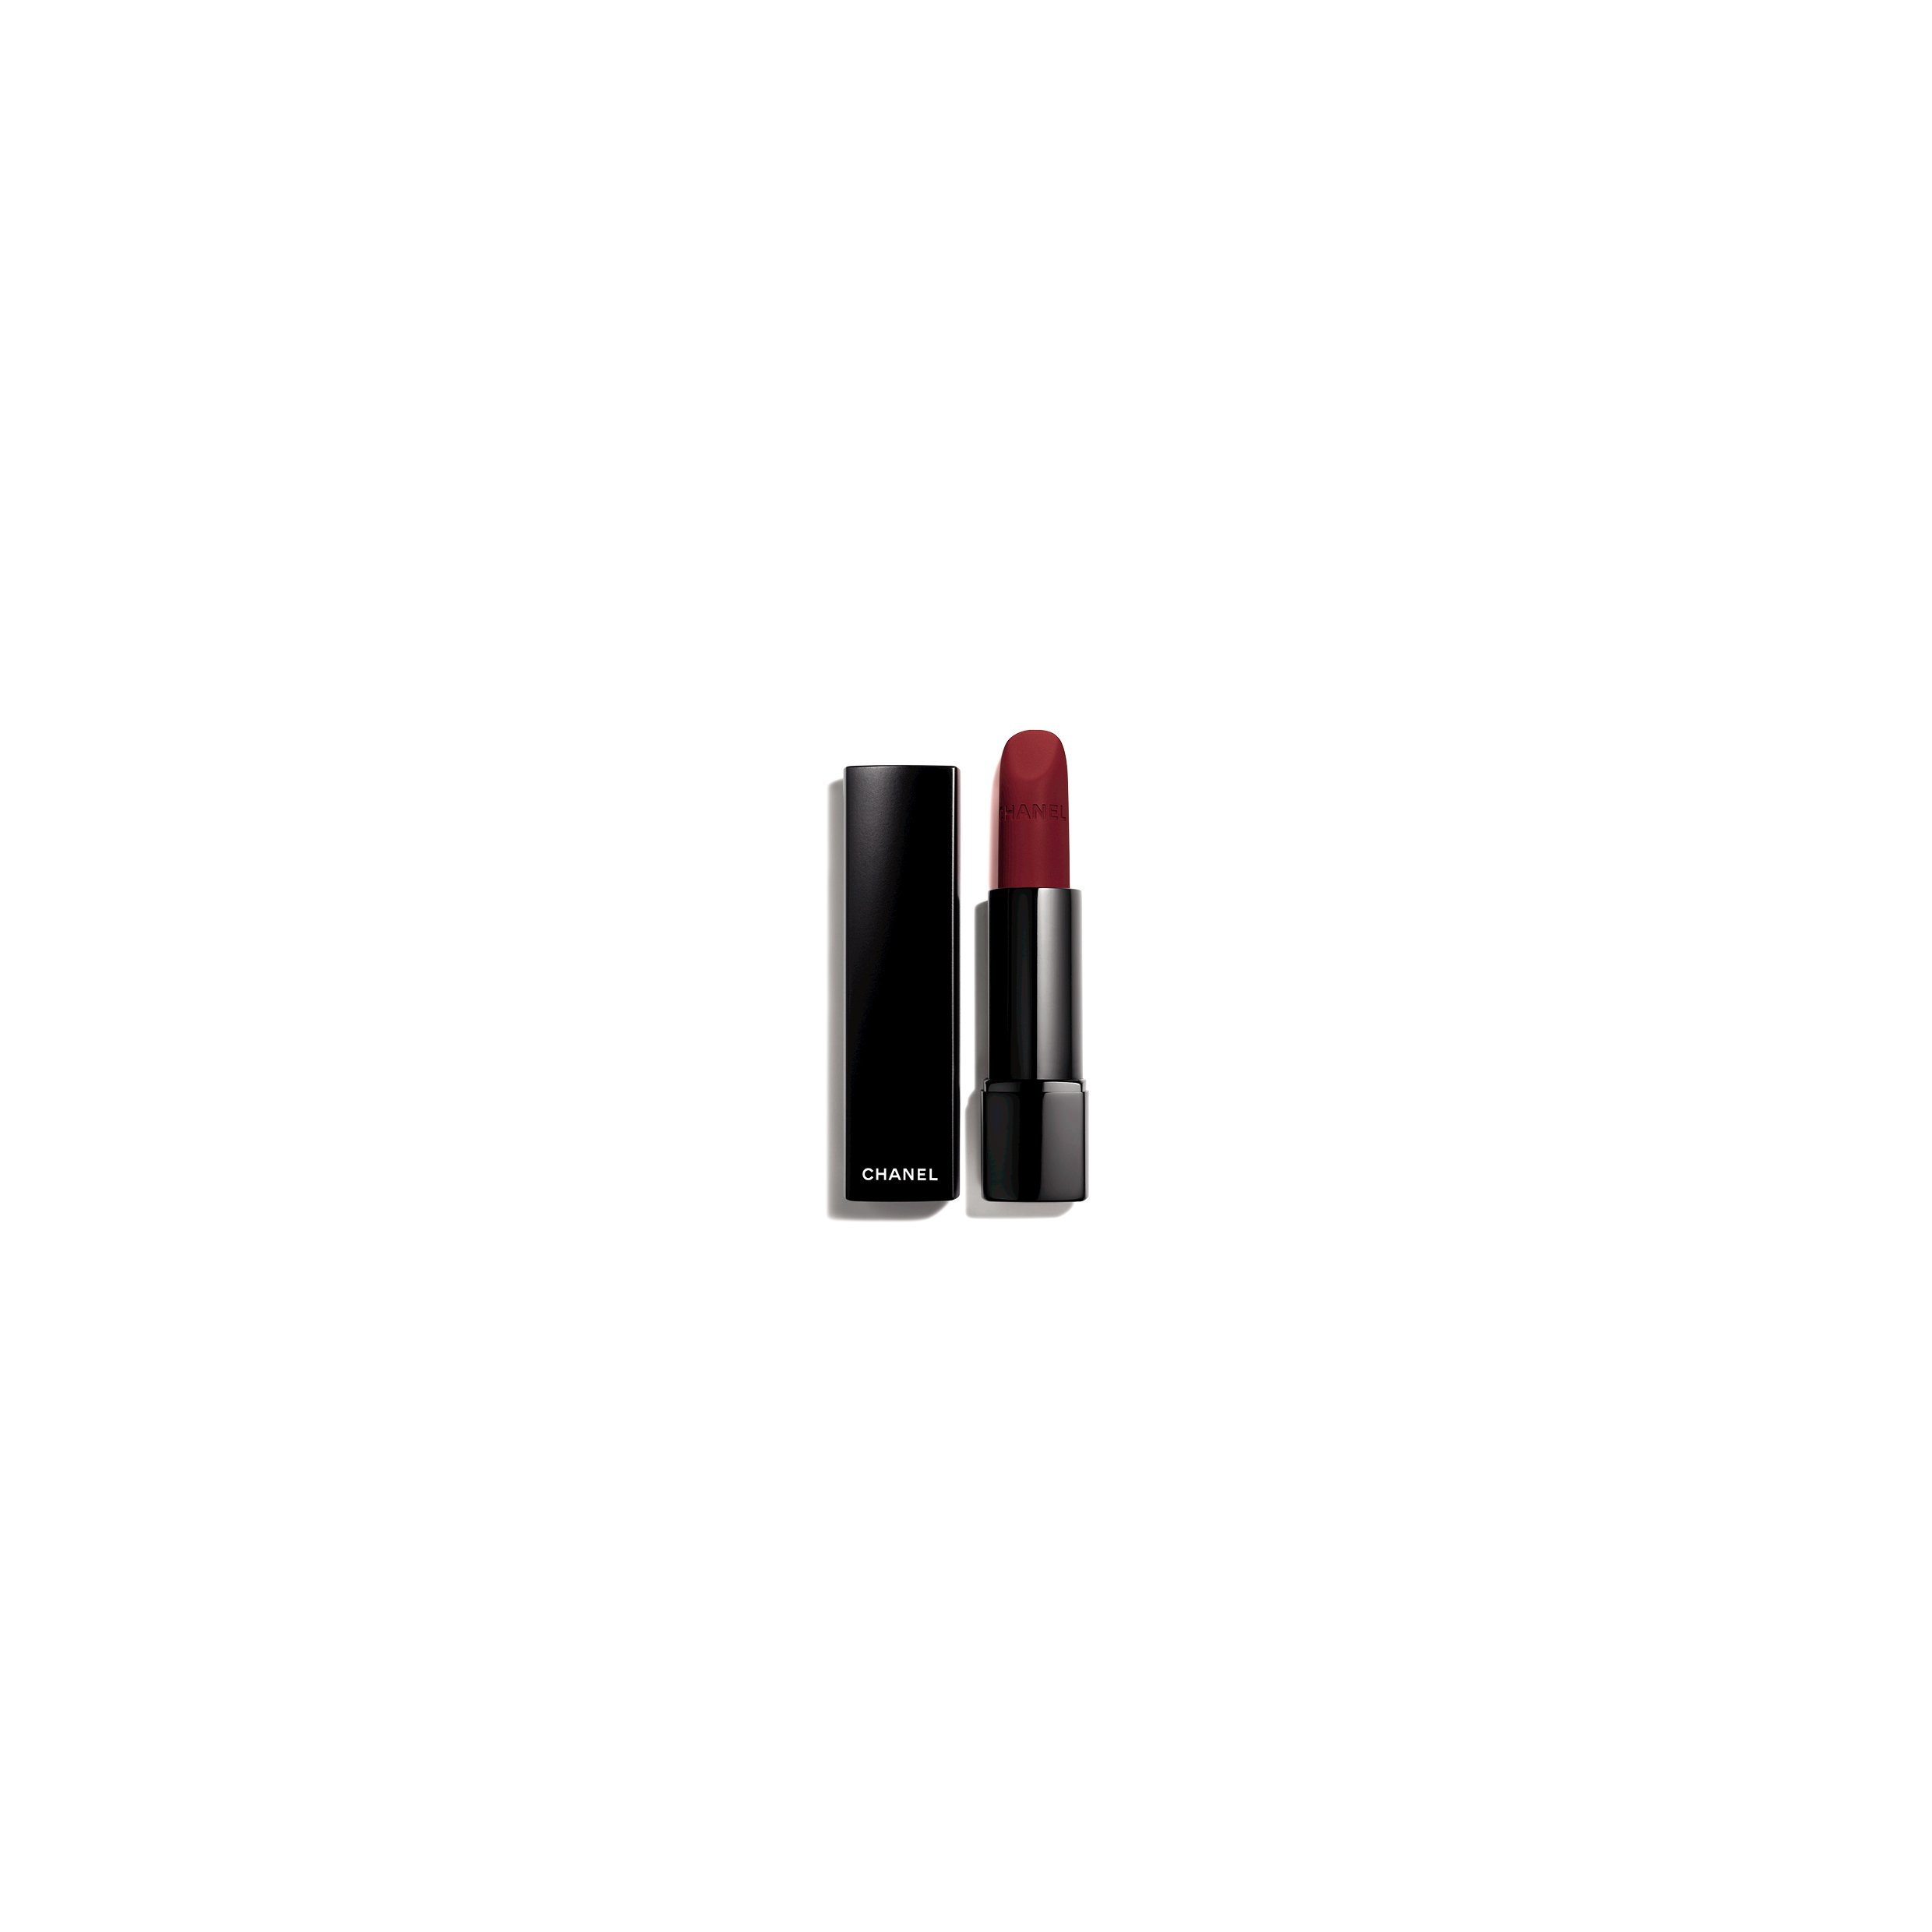 metiers lucia pica rouge allure velvet extreme rouge obscur